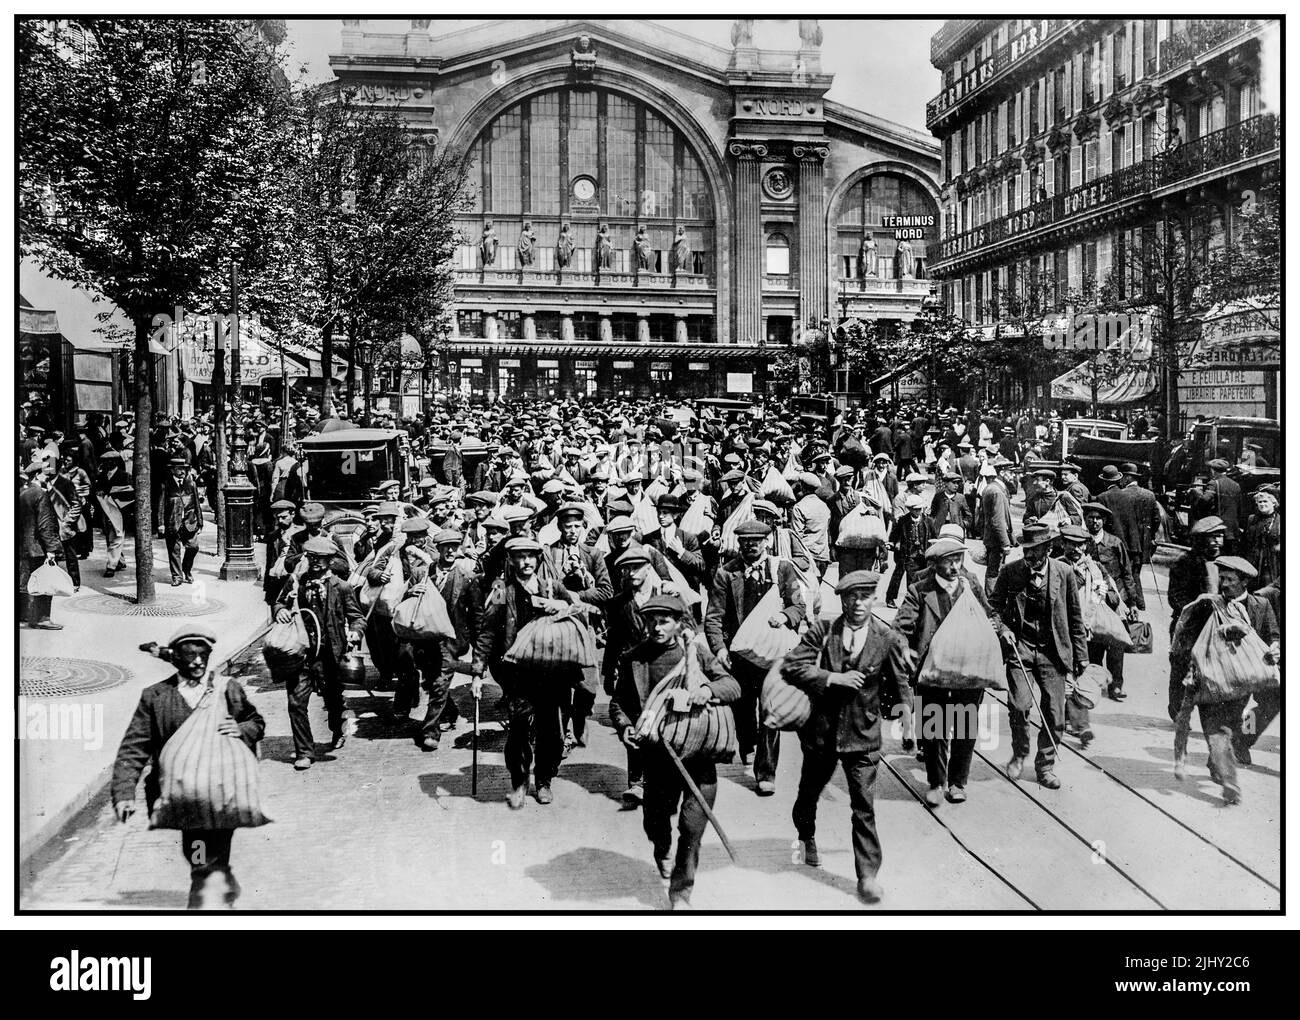 WW1 Belgian Reservisis of all ages arrive in Paris from the Gare de L'Est Railway Station in background to fight Imperial Germany World War 1 First World War The Great War Paris France Stock Photo